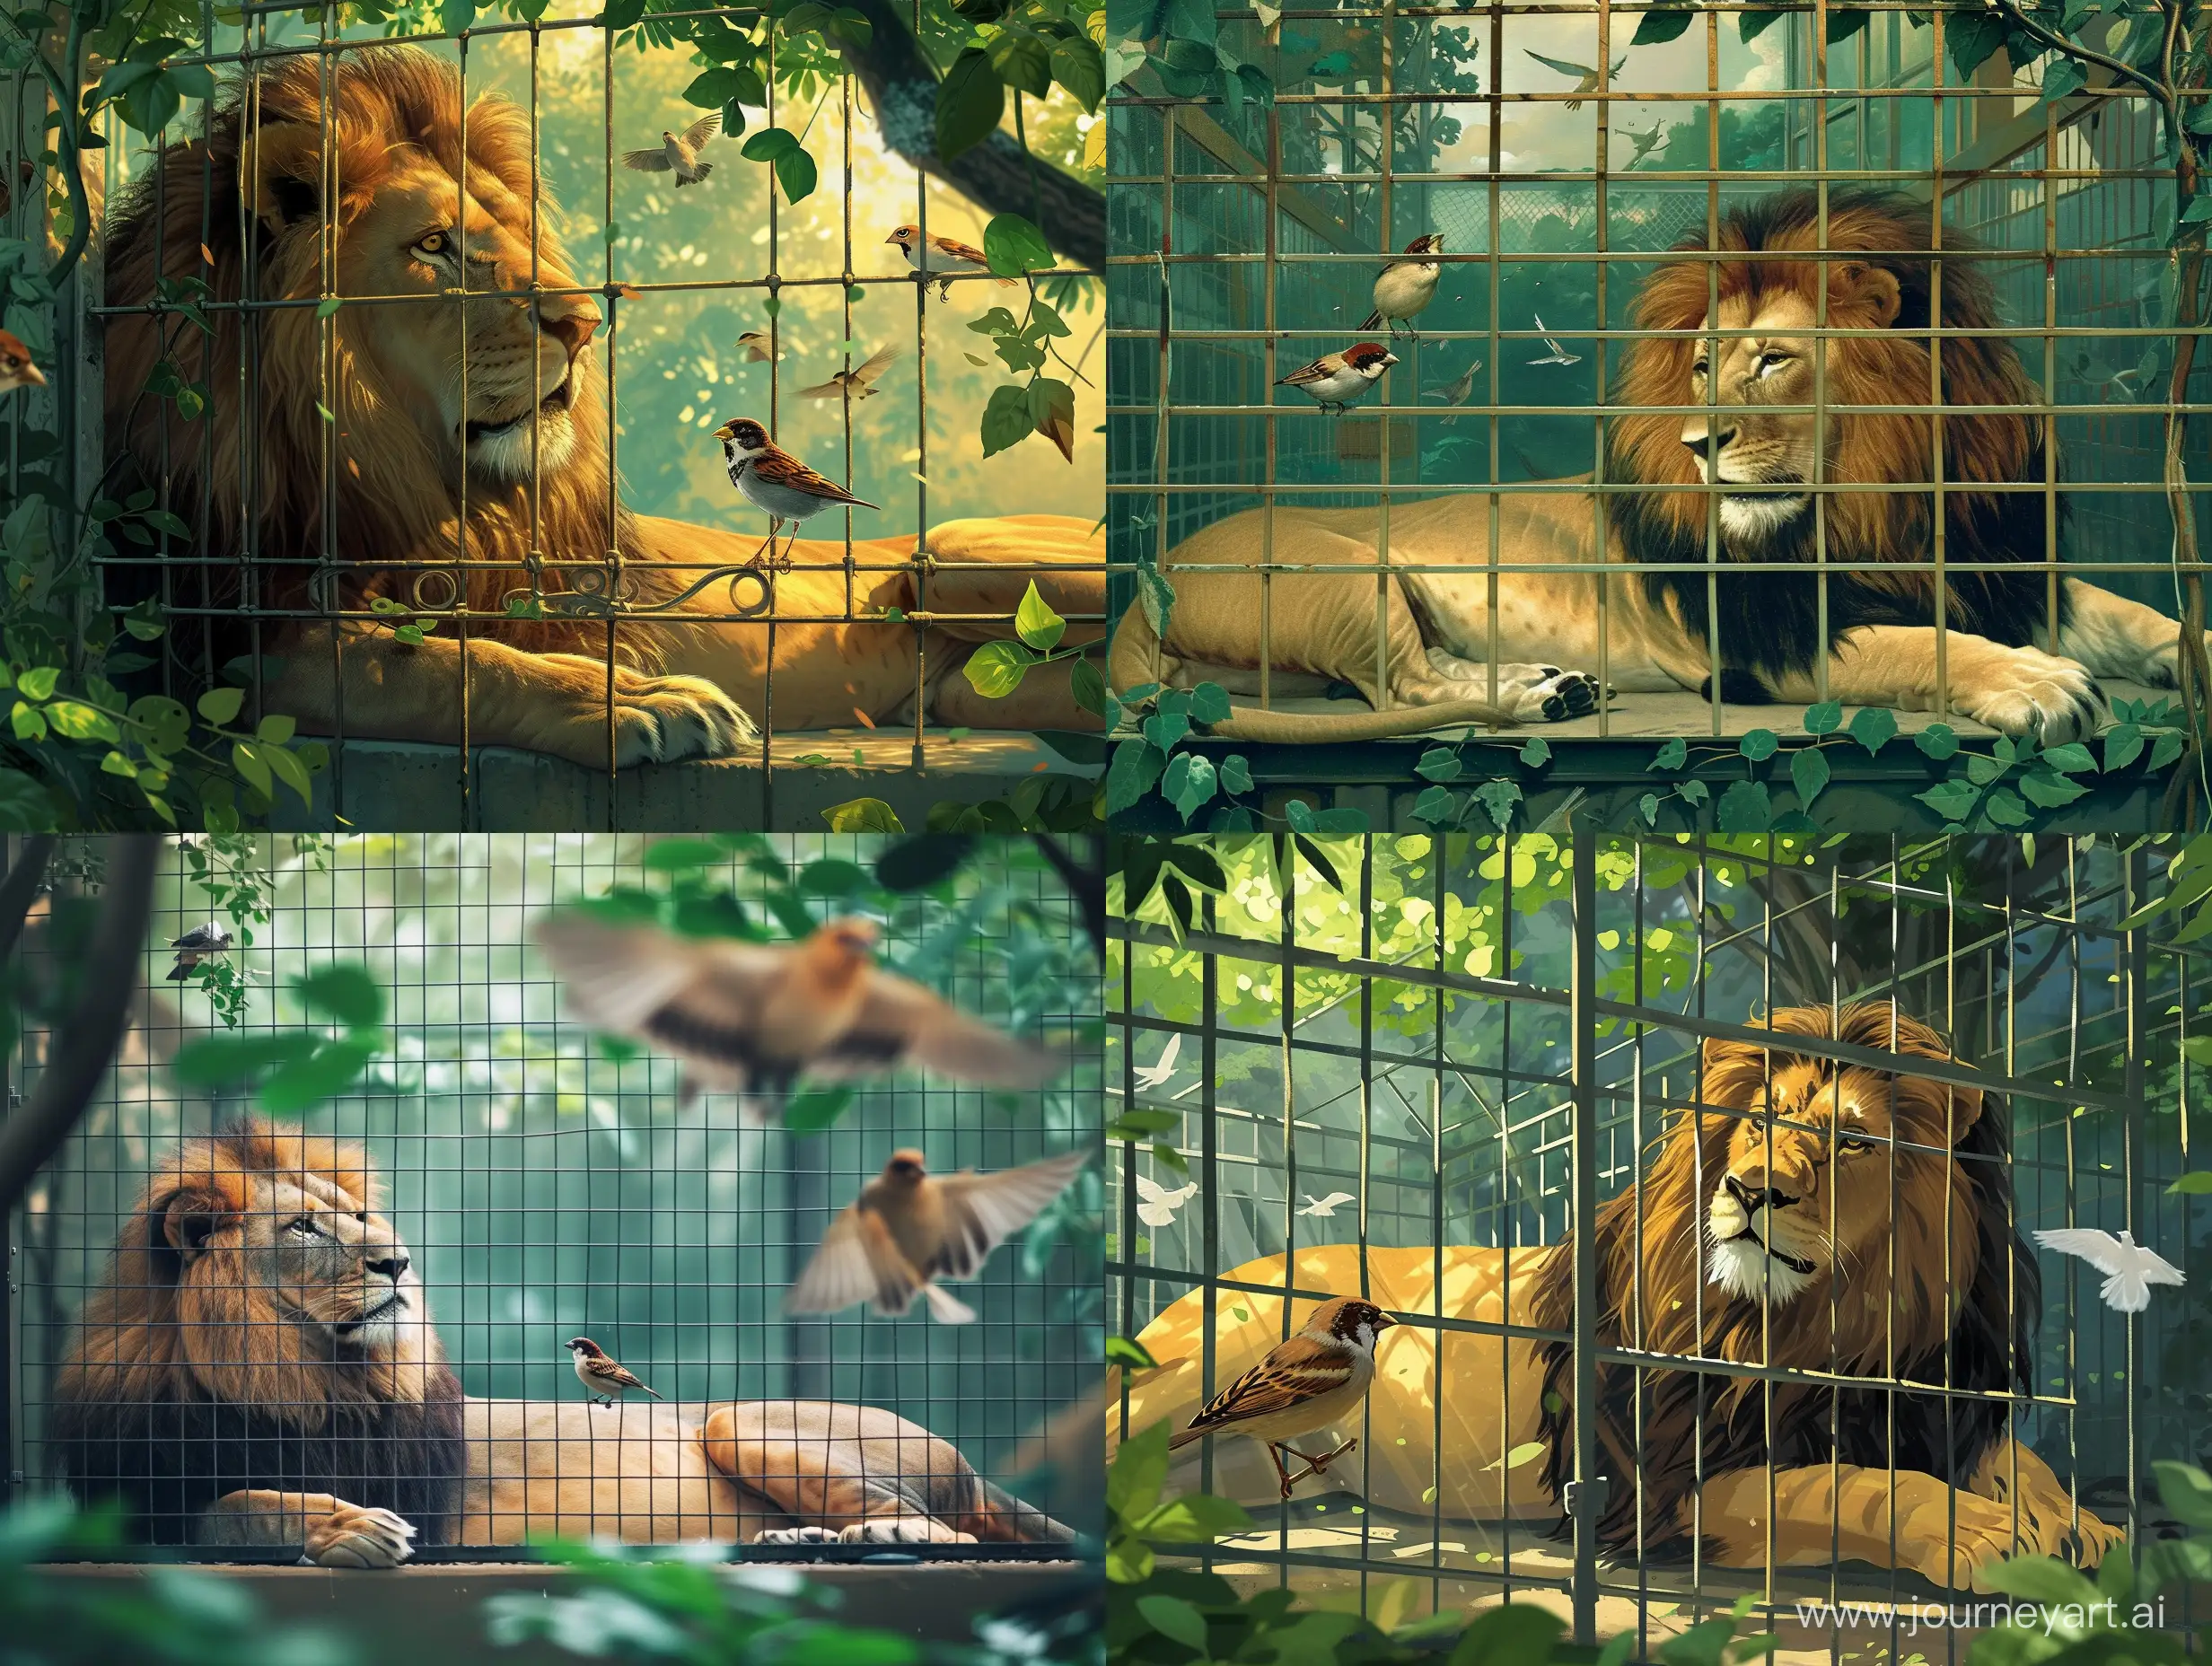 Harmony-in-Captivity-Sparrow-and-Lion-Coexistence-in-Zoo